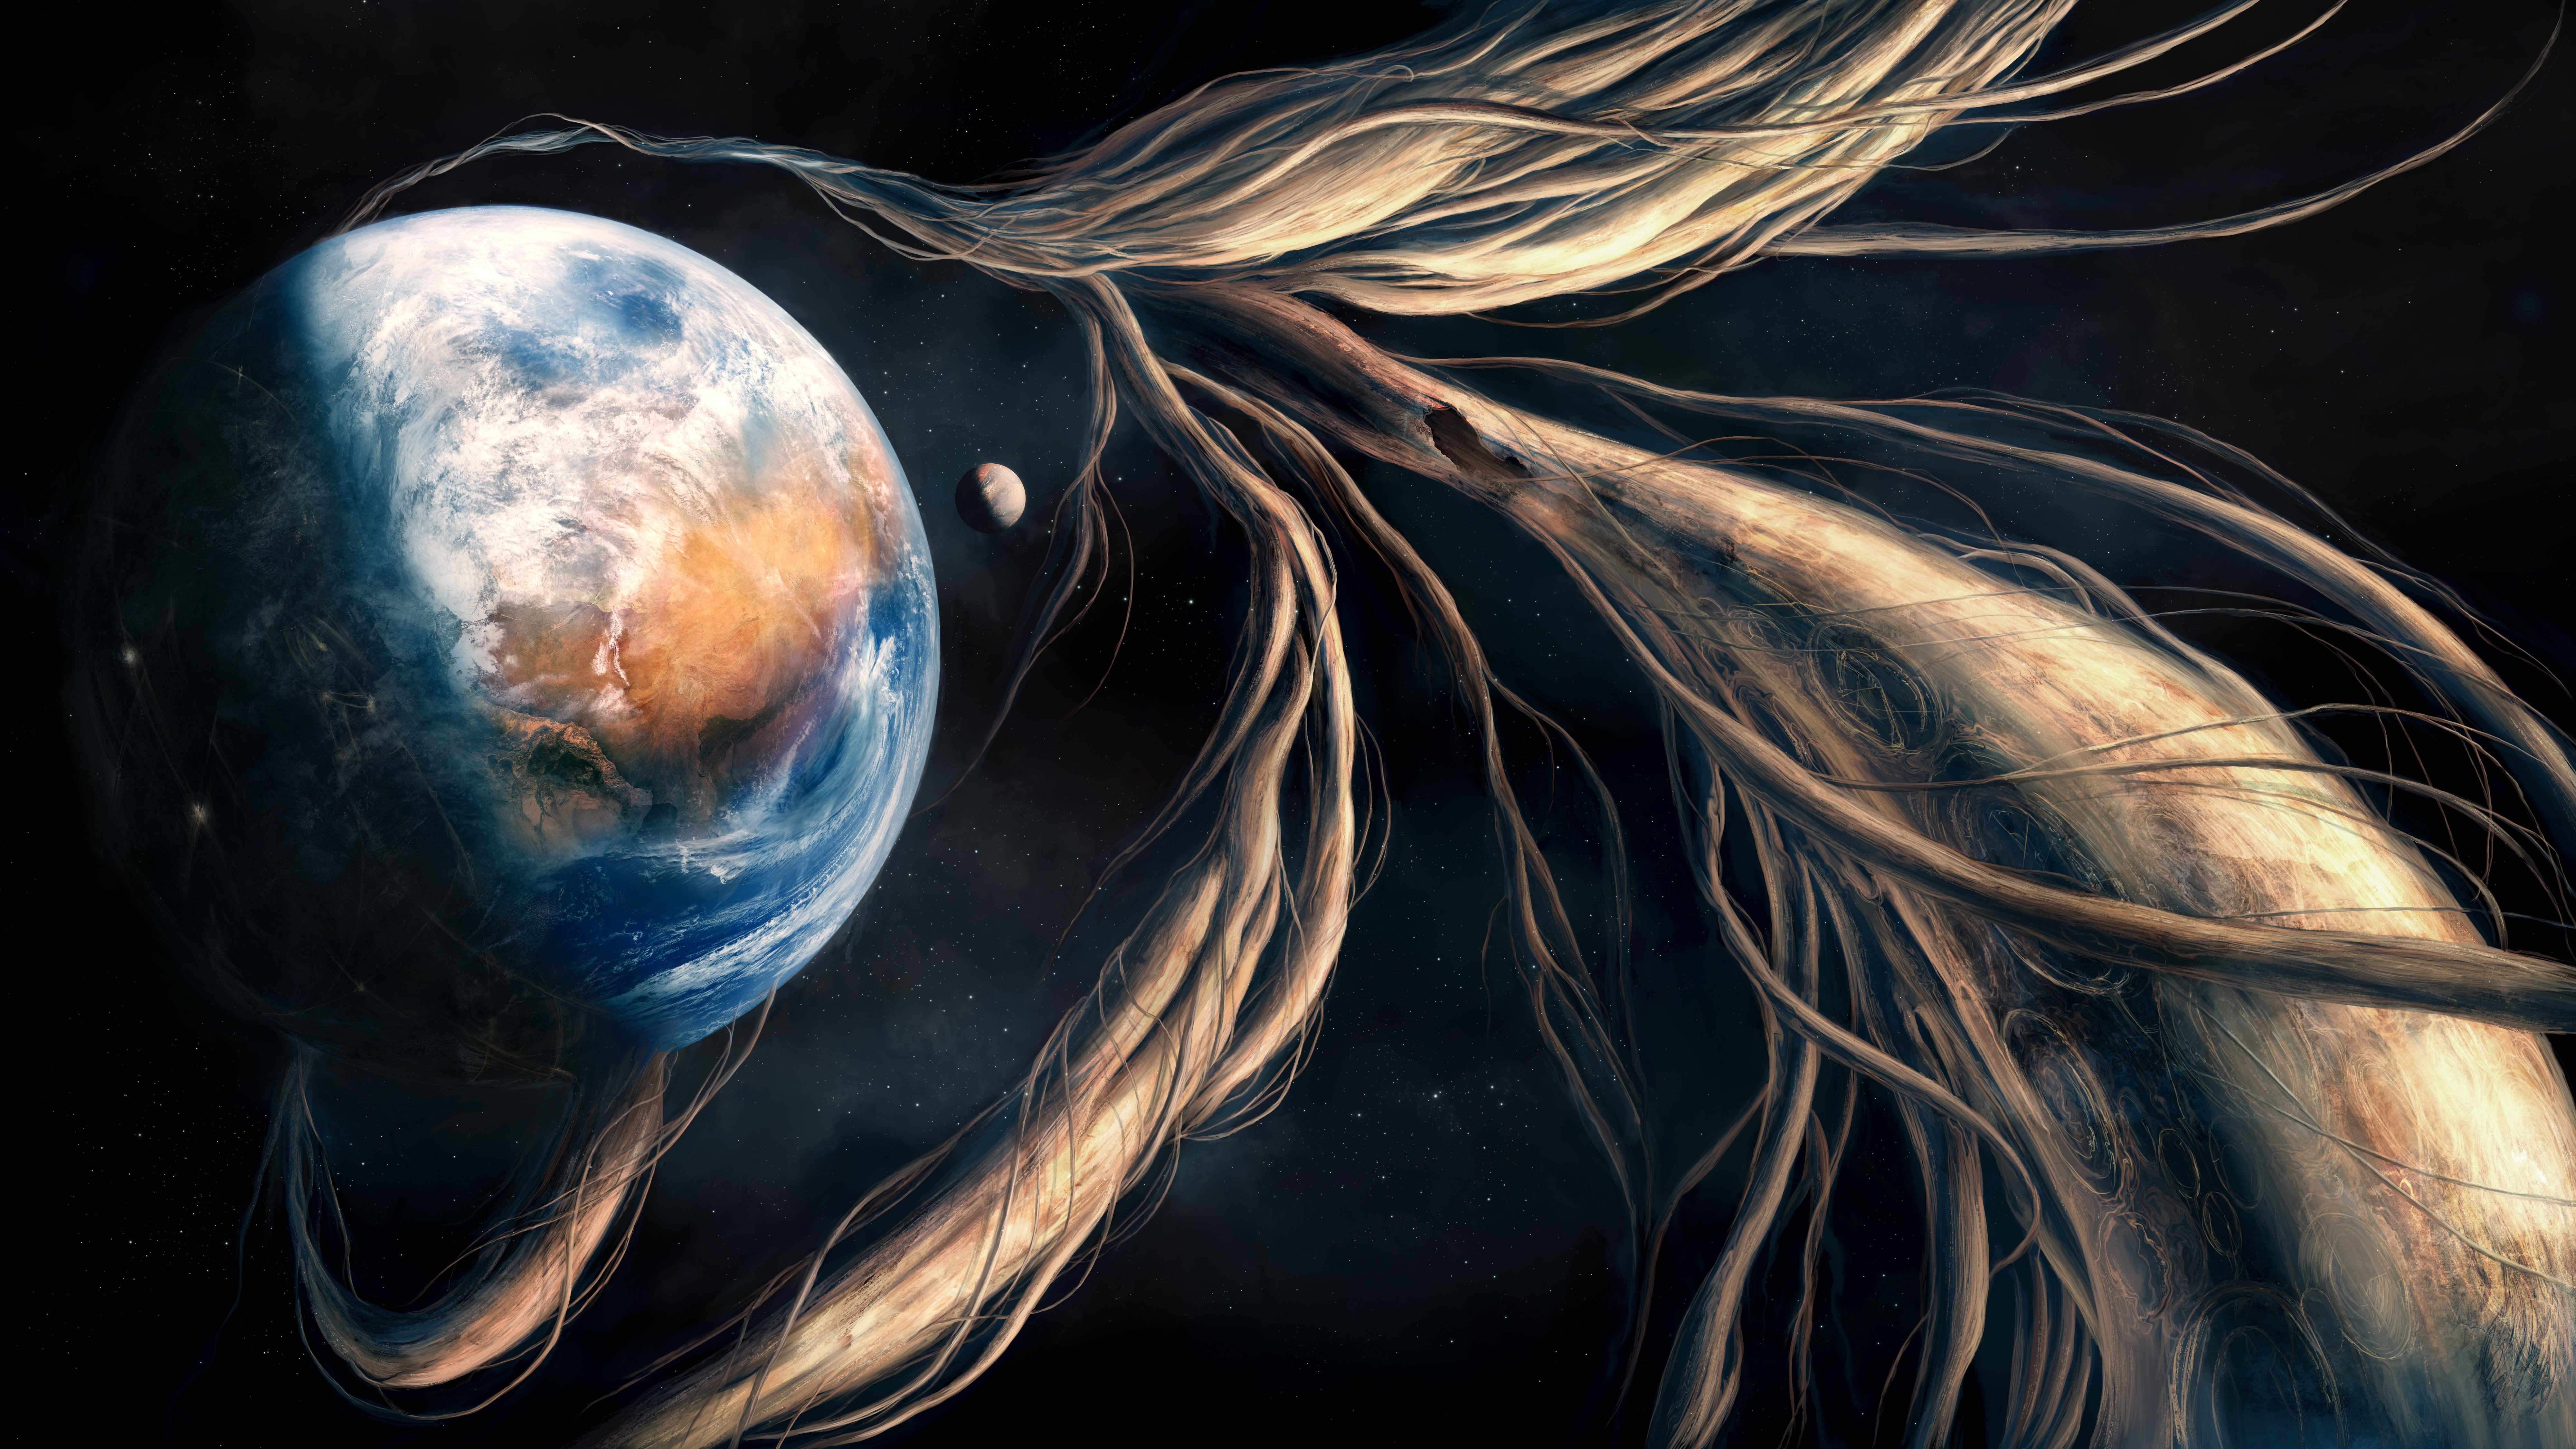 General 8000x4500 artwork science fiction abstract space universe Earth planet Moon